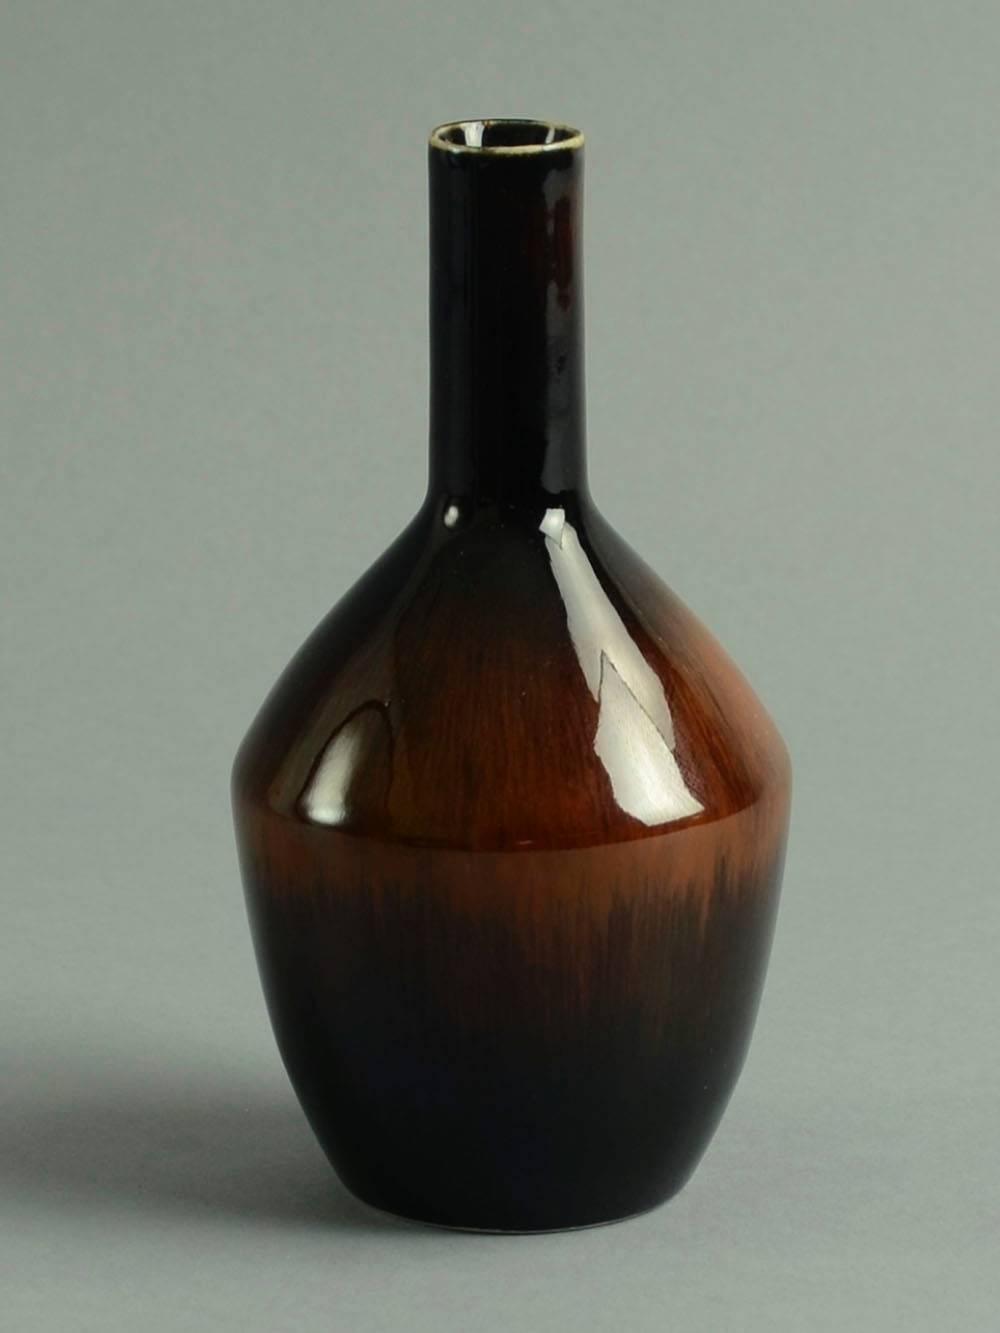 1. Stoneware vase with glossy red-brown and black glaze, 1950s-60s.
Height 6 1/4" (16cm) Width 3 1/2" (9cm) No. A1427
2. Stoneware vase with glossy red-brown and black glaze, 1950s-60s.
Height 4" (10cm) Width 2" (5cm) No.